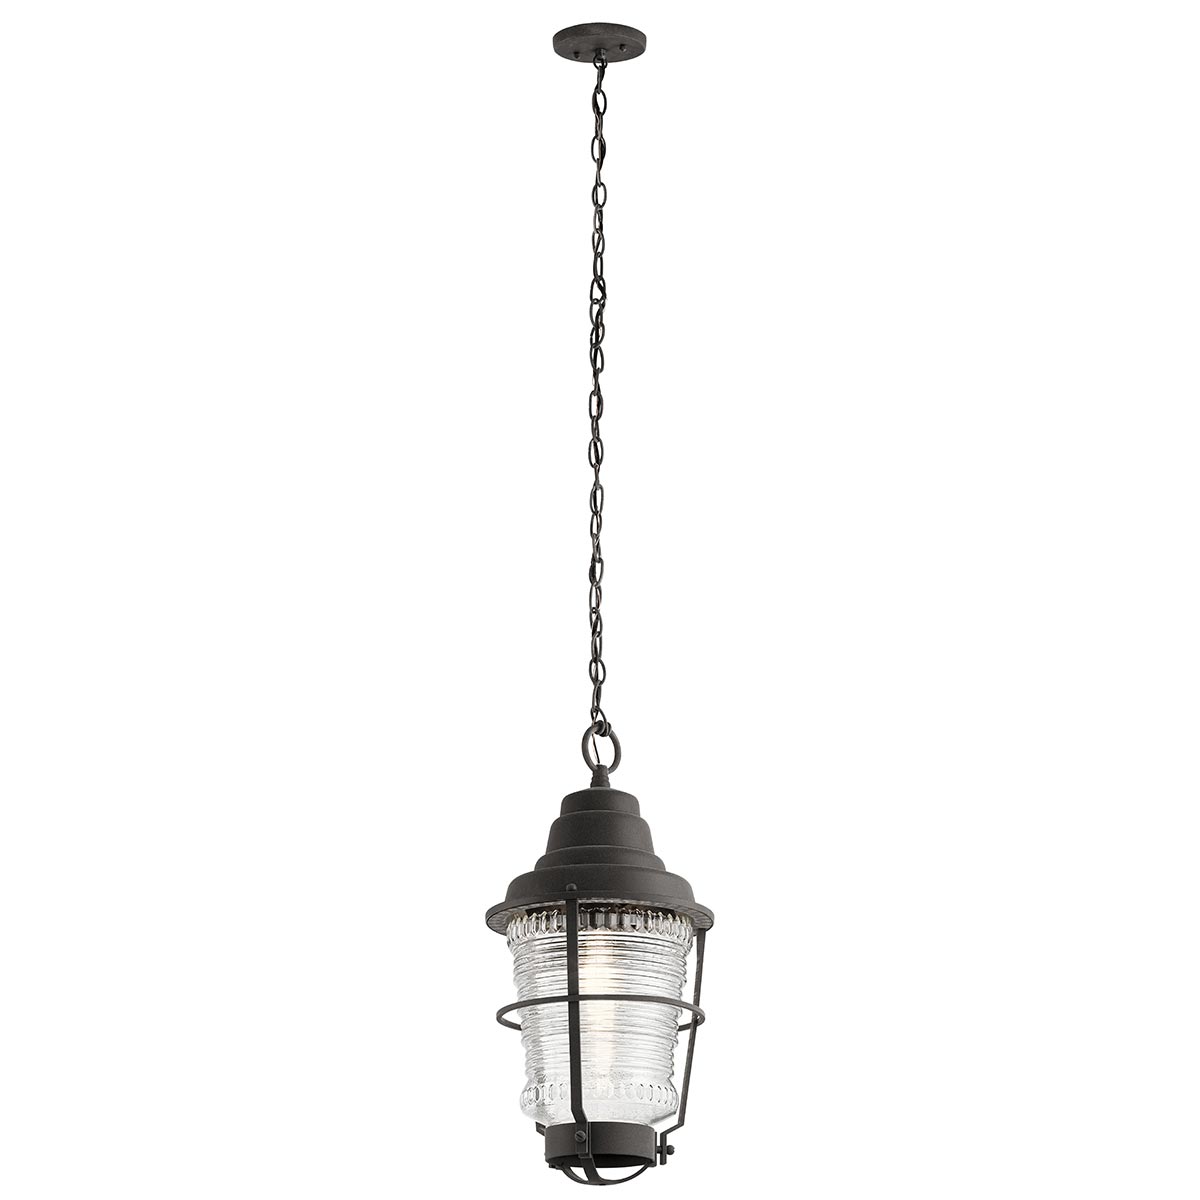 Chance Harbor Outdoor Porch Chain Lantern Weathered Zinc Ribbed Glass